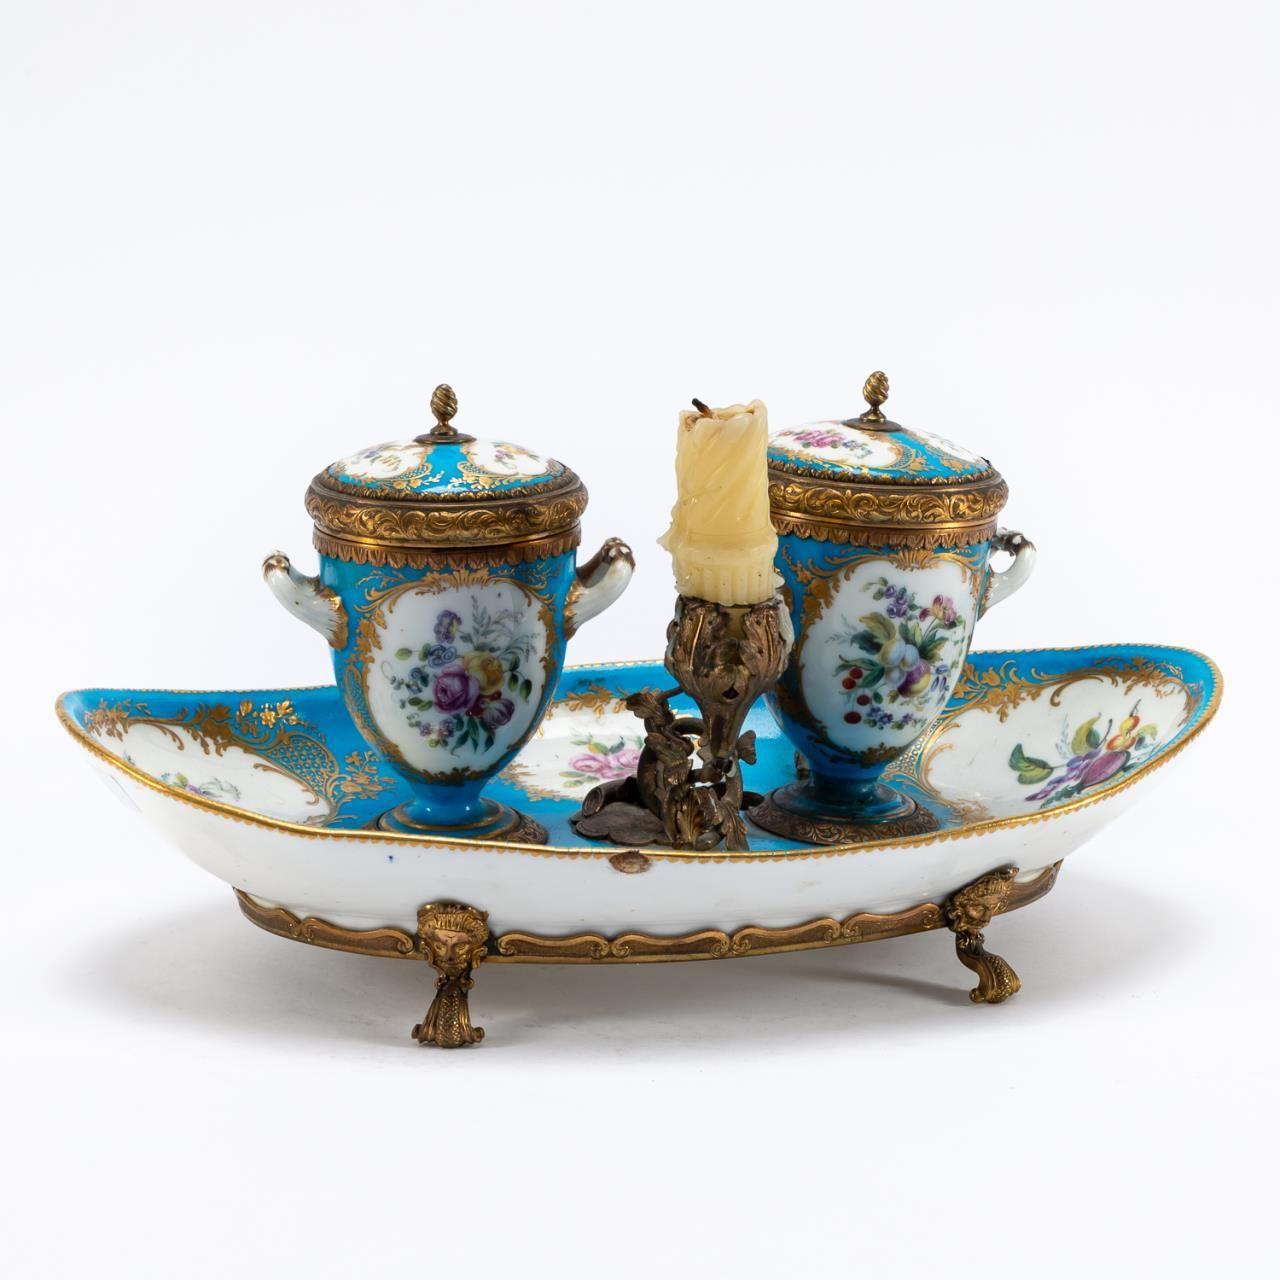 French, 19th century. Bronze ormolu mounted blue ground porcelain navette- form footed encrier or inkstand in the manner of Sevres, having gilt accented reserves decorated with florals, two inkwells with glass liners, single candleholder, and pen